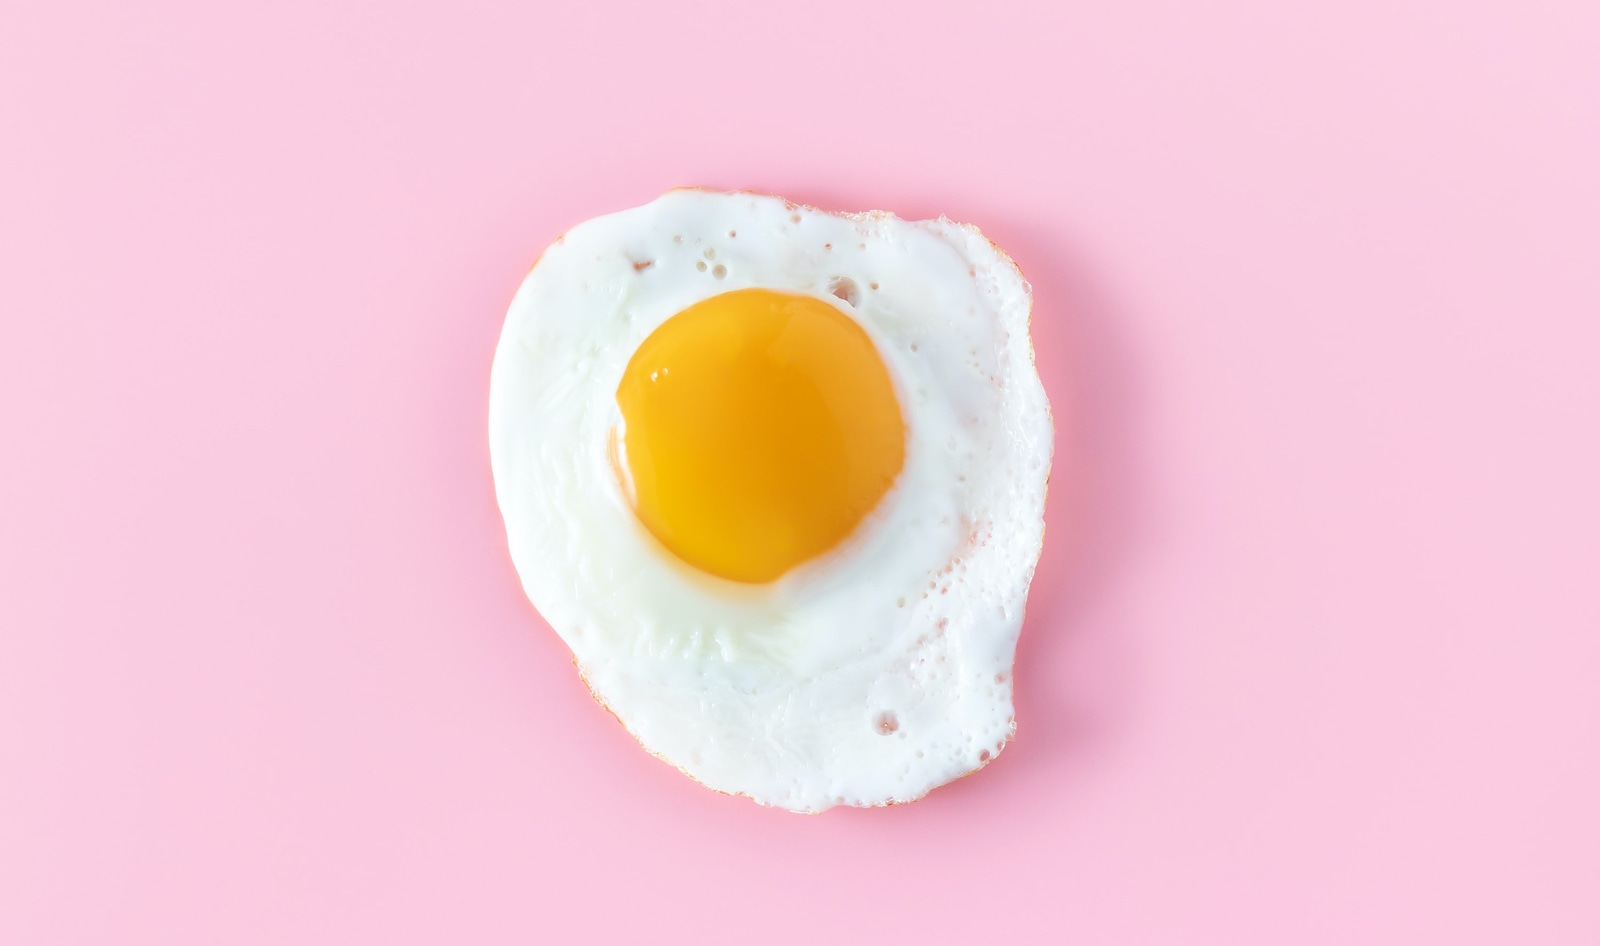 Here's How This Startup Made the World's First Animal-Free Egg Whites